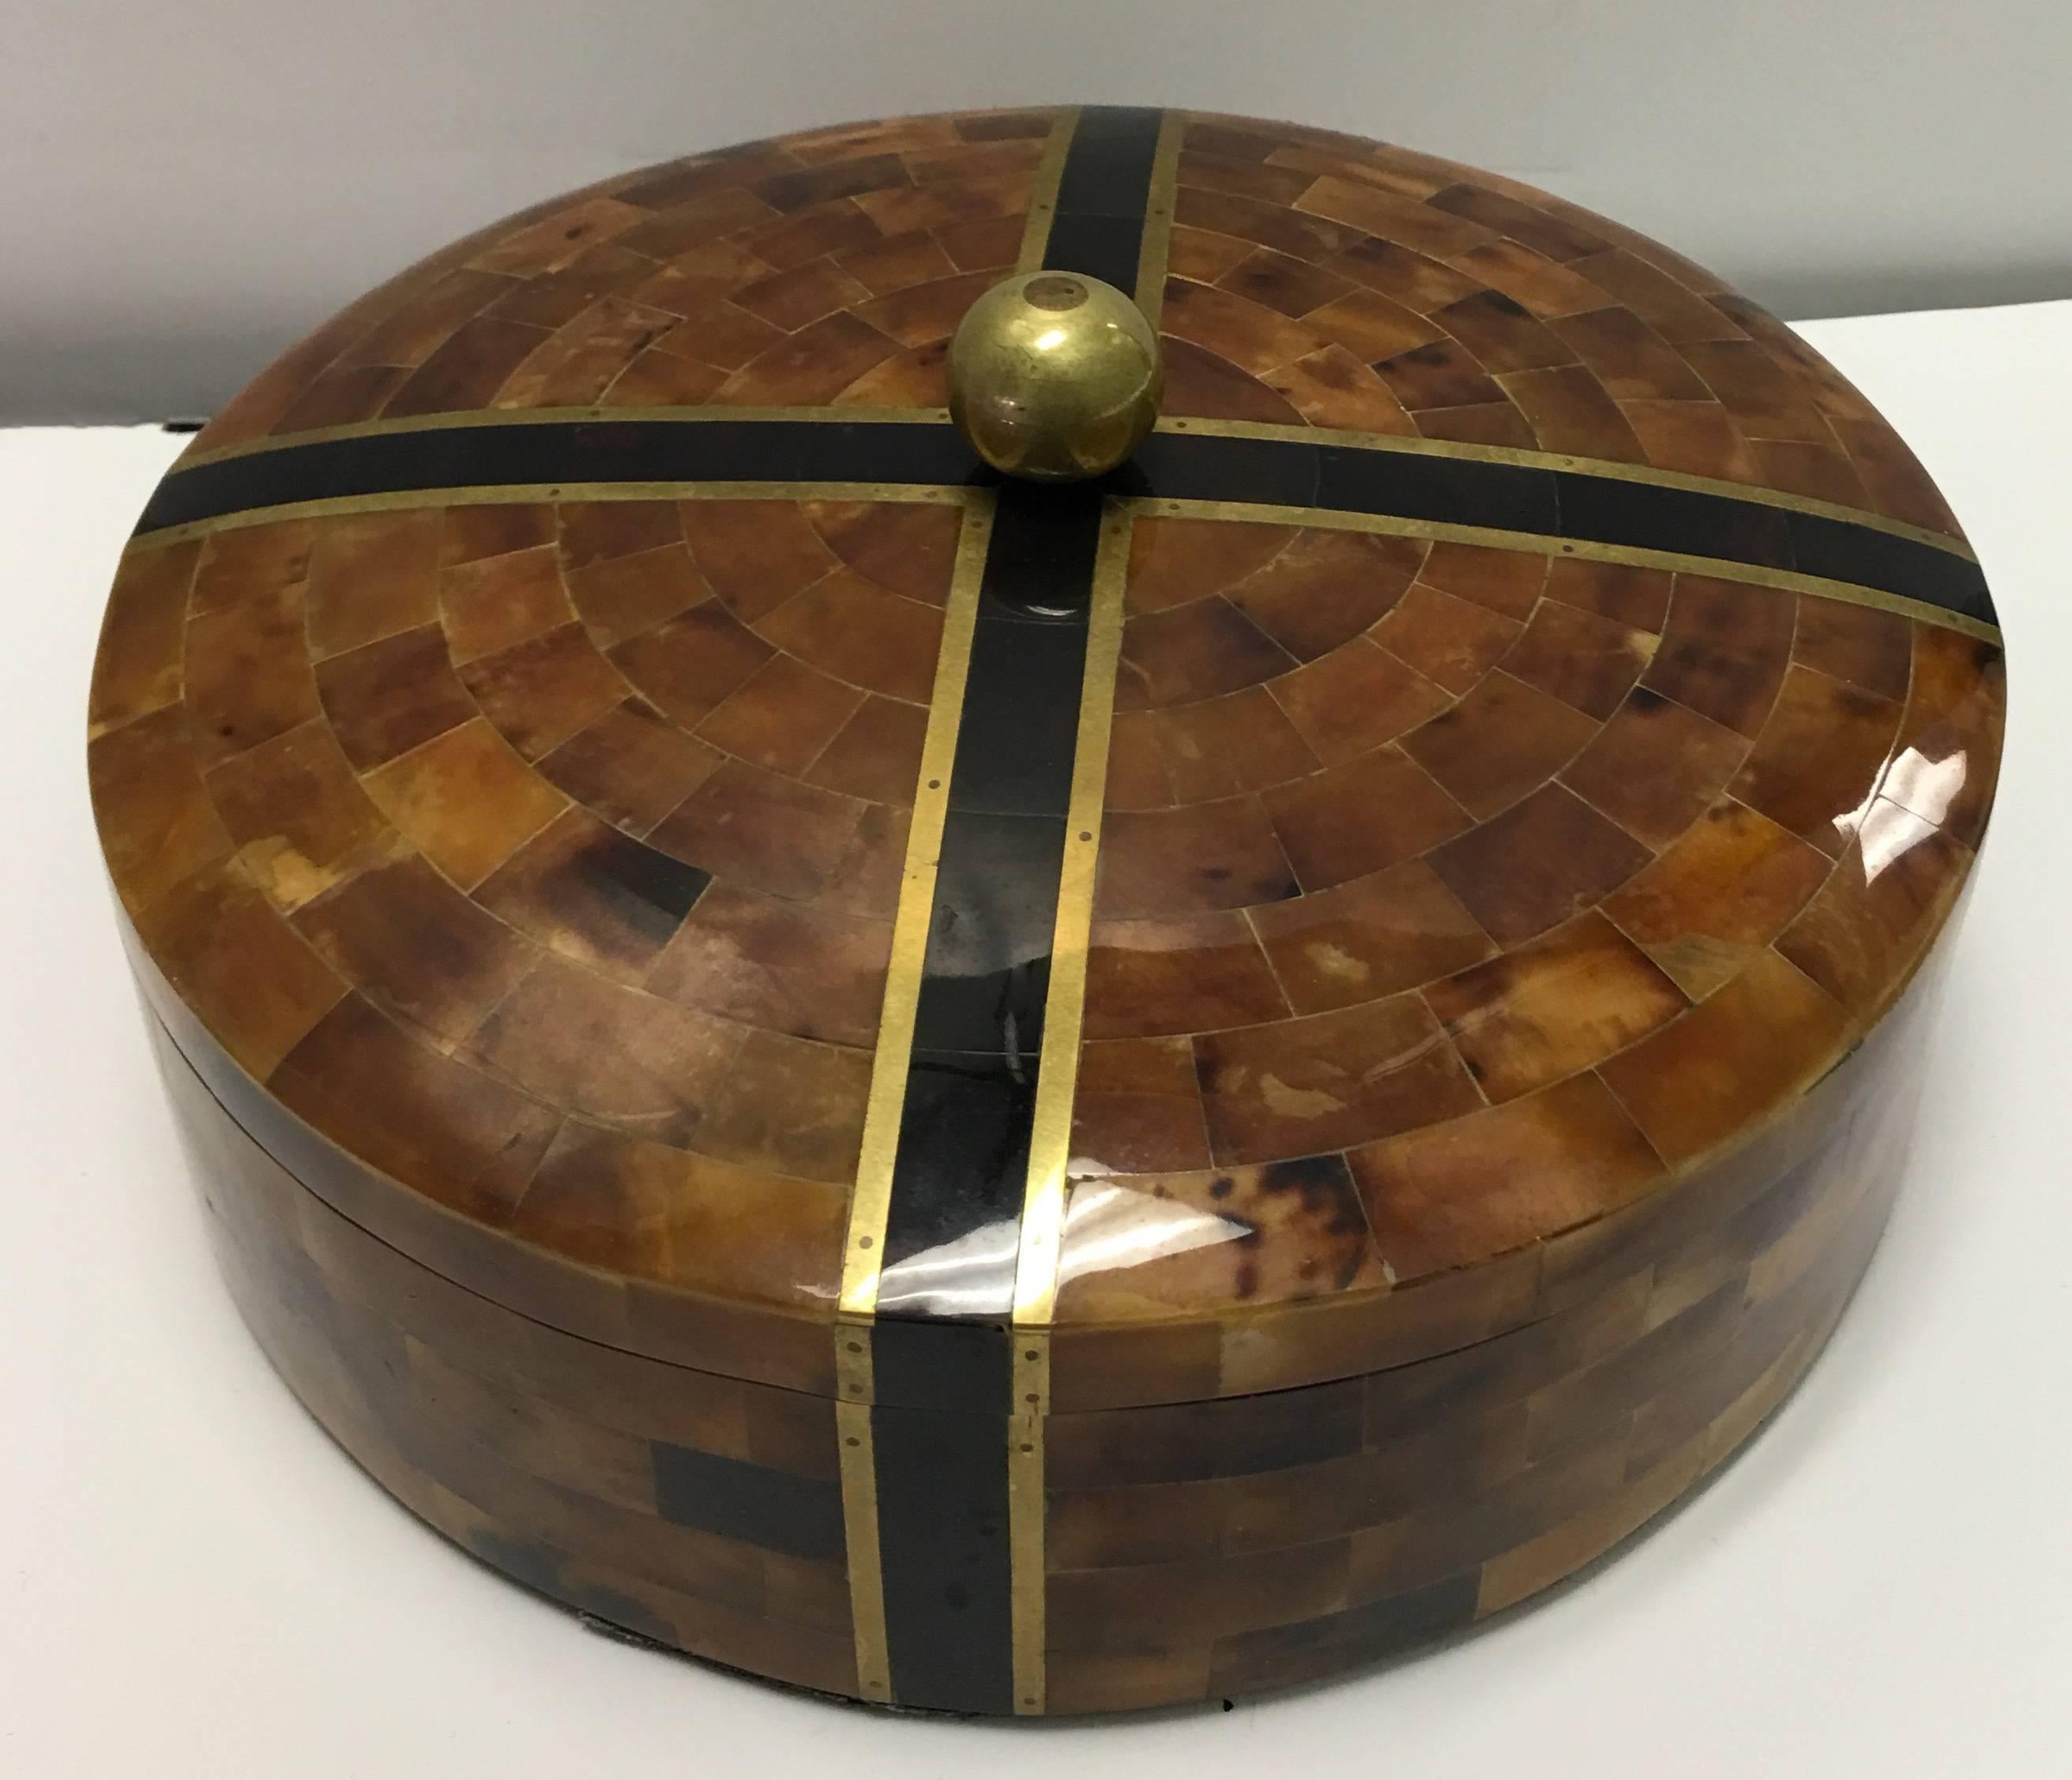 Maitland-Smith round pen shell box. Mahogany wood with brown pen shell overlay and brass accents. Round brass finial. No makers mark/ signature.